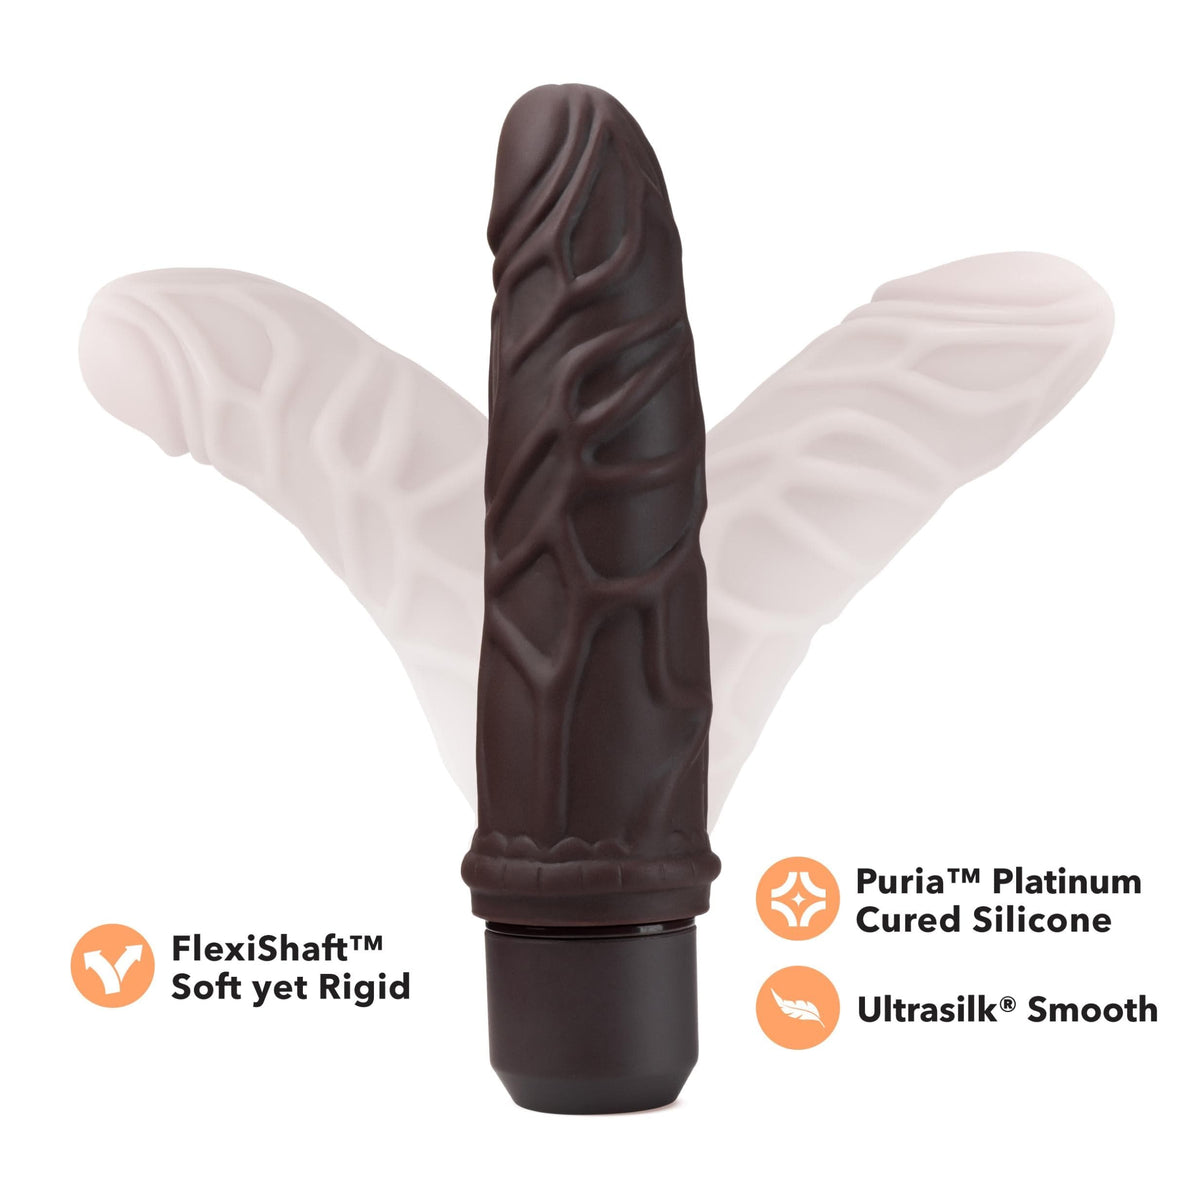 dr skin silicone dr robert 7 inch vibrating dildo brown